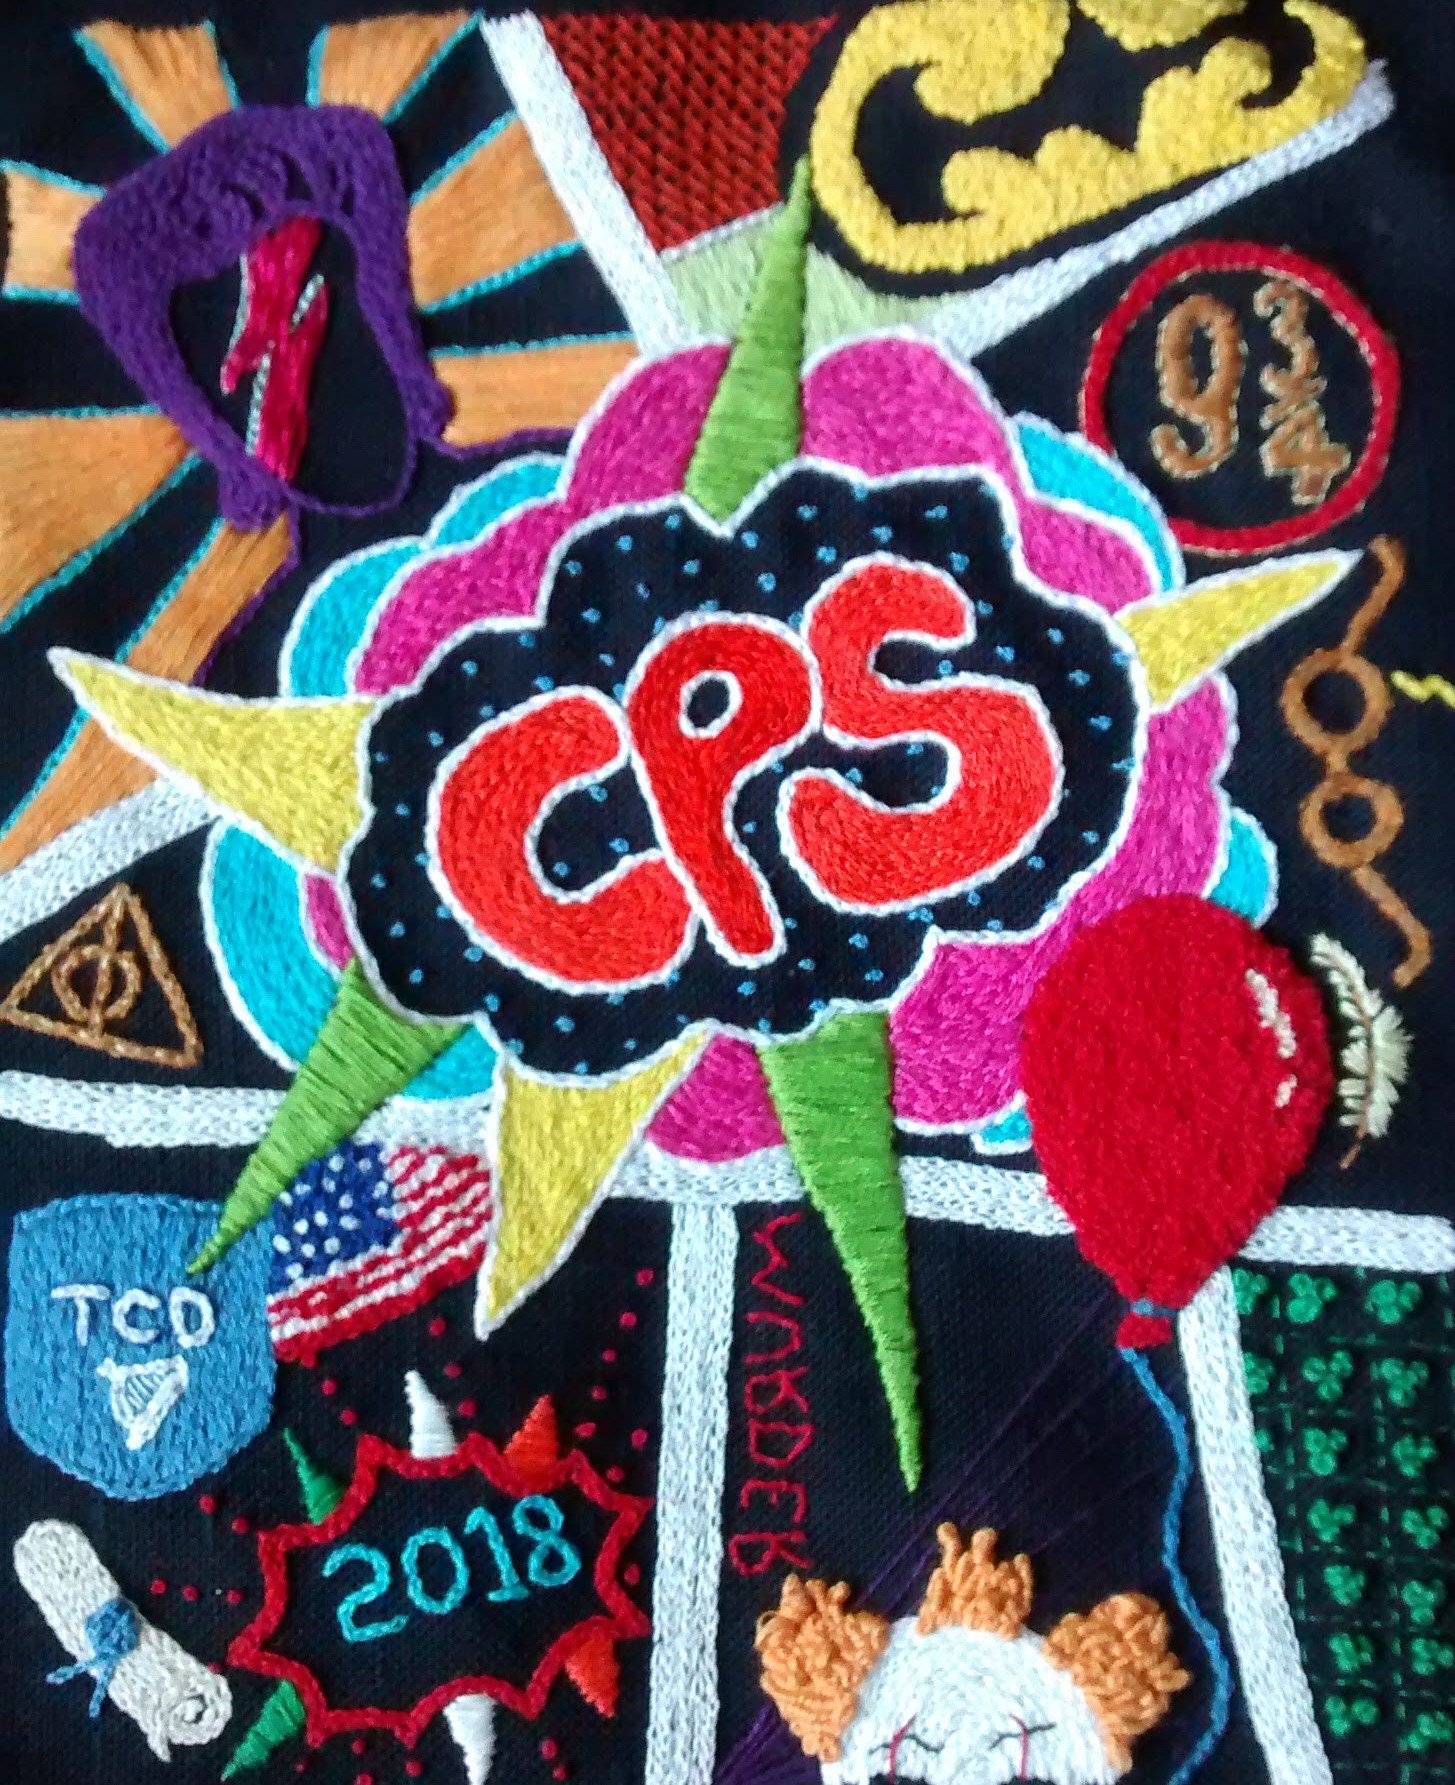 Pop Art Hand Embroidery designs by Sally-Ann Duffy submitted to School of Stitched Textiles creative bursary Scheme and shortlisted. 